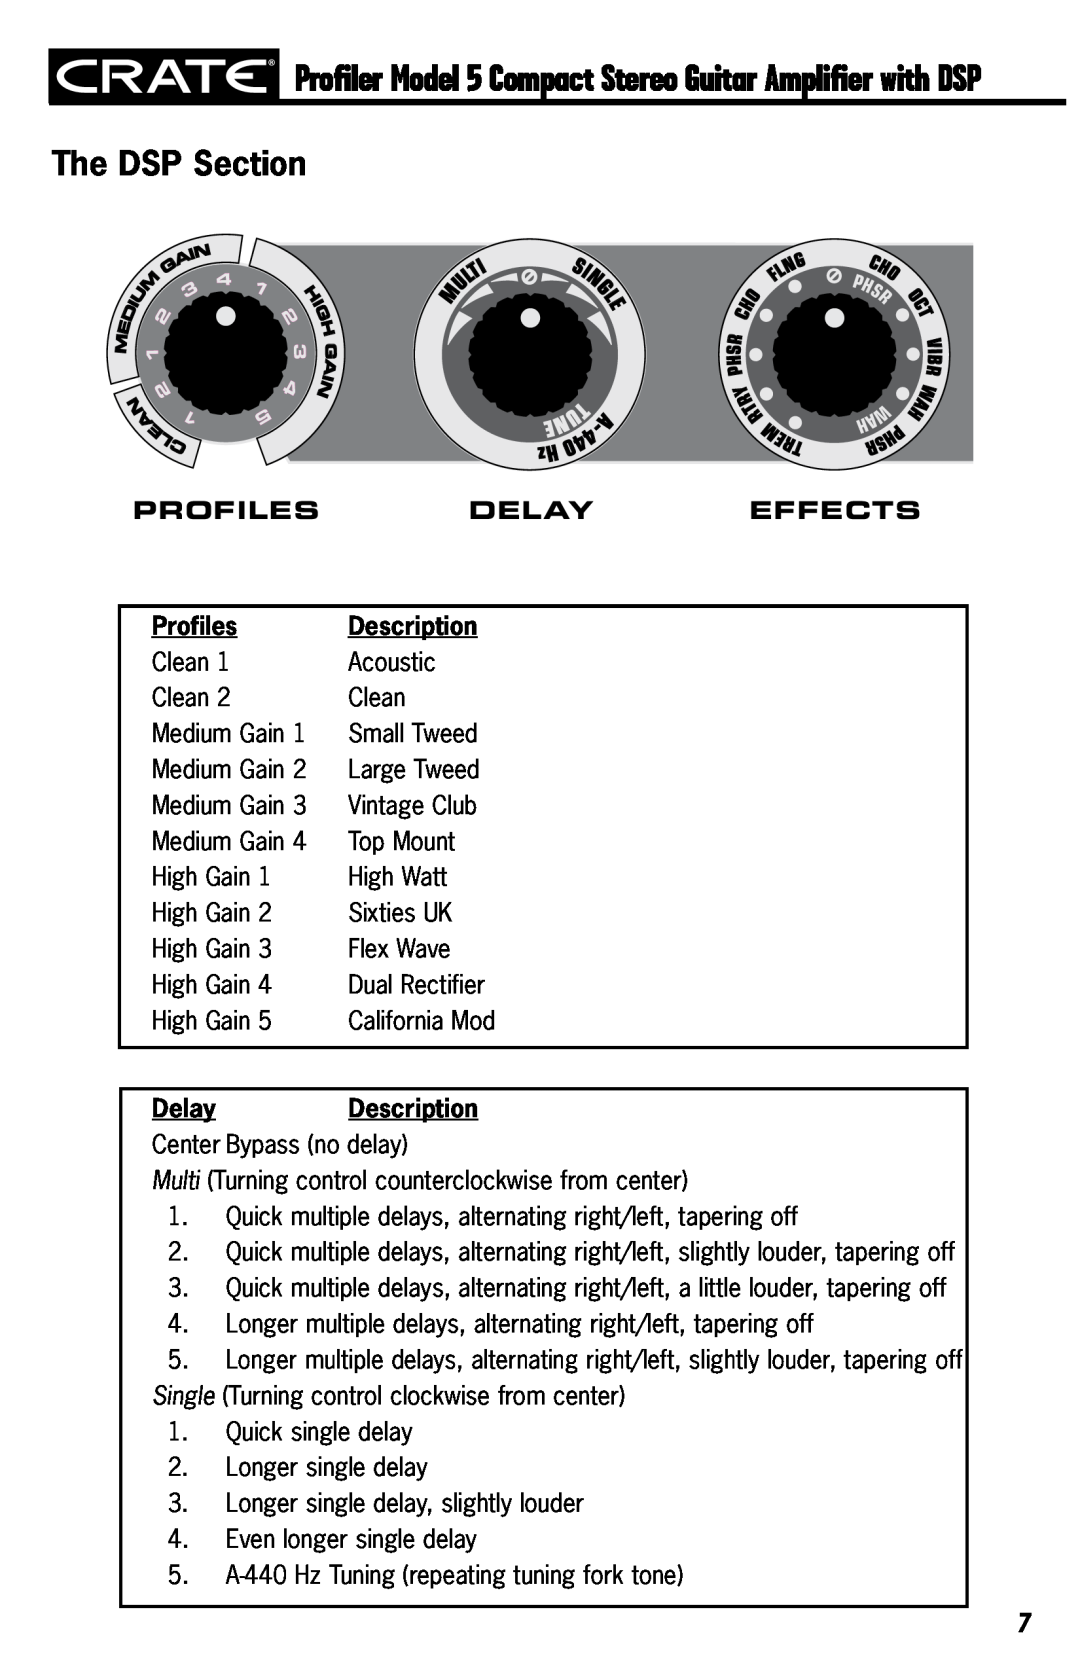 Crate Amplifiers 5 owner manual The DSP Section, Profiles, Delay, Effects, Description 